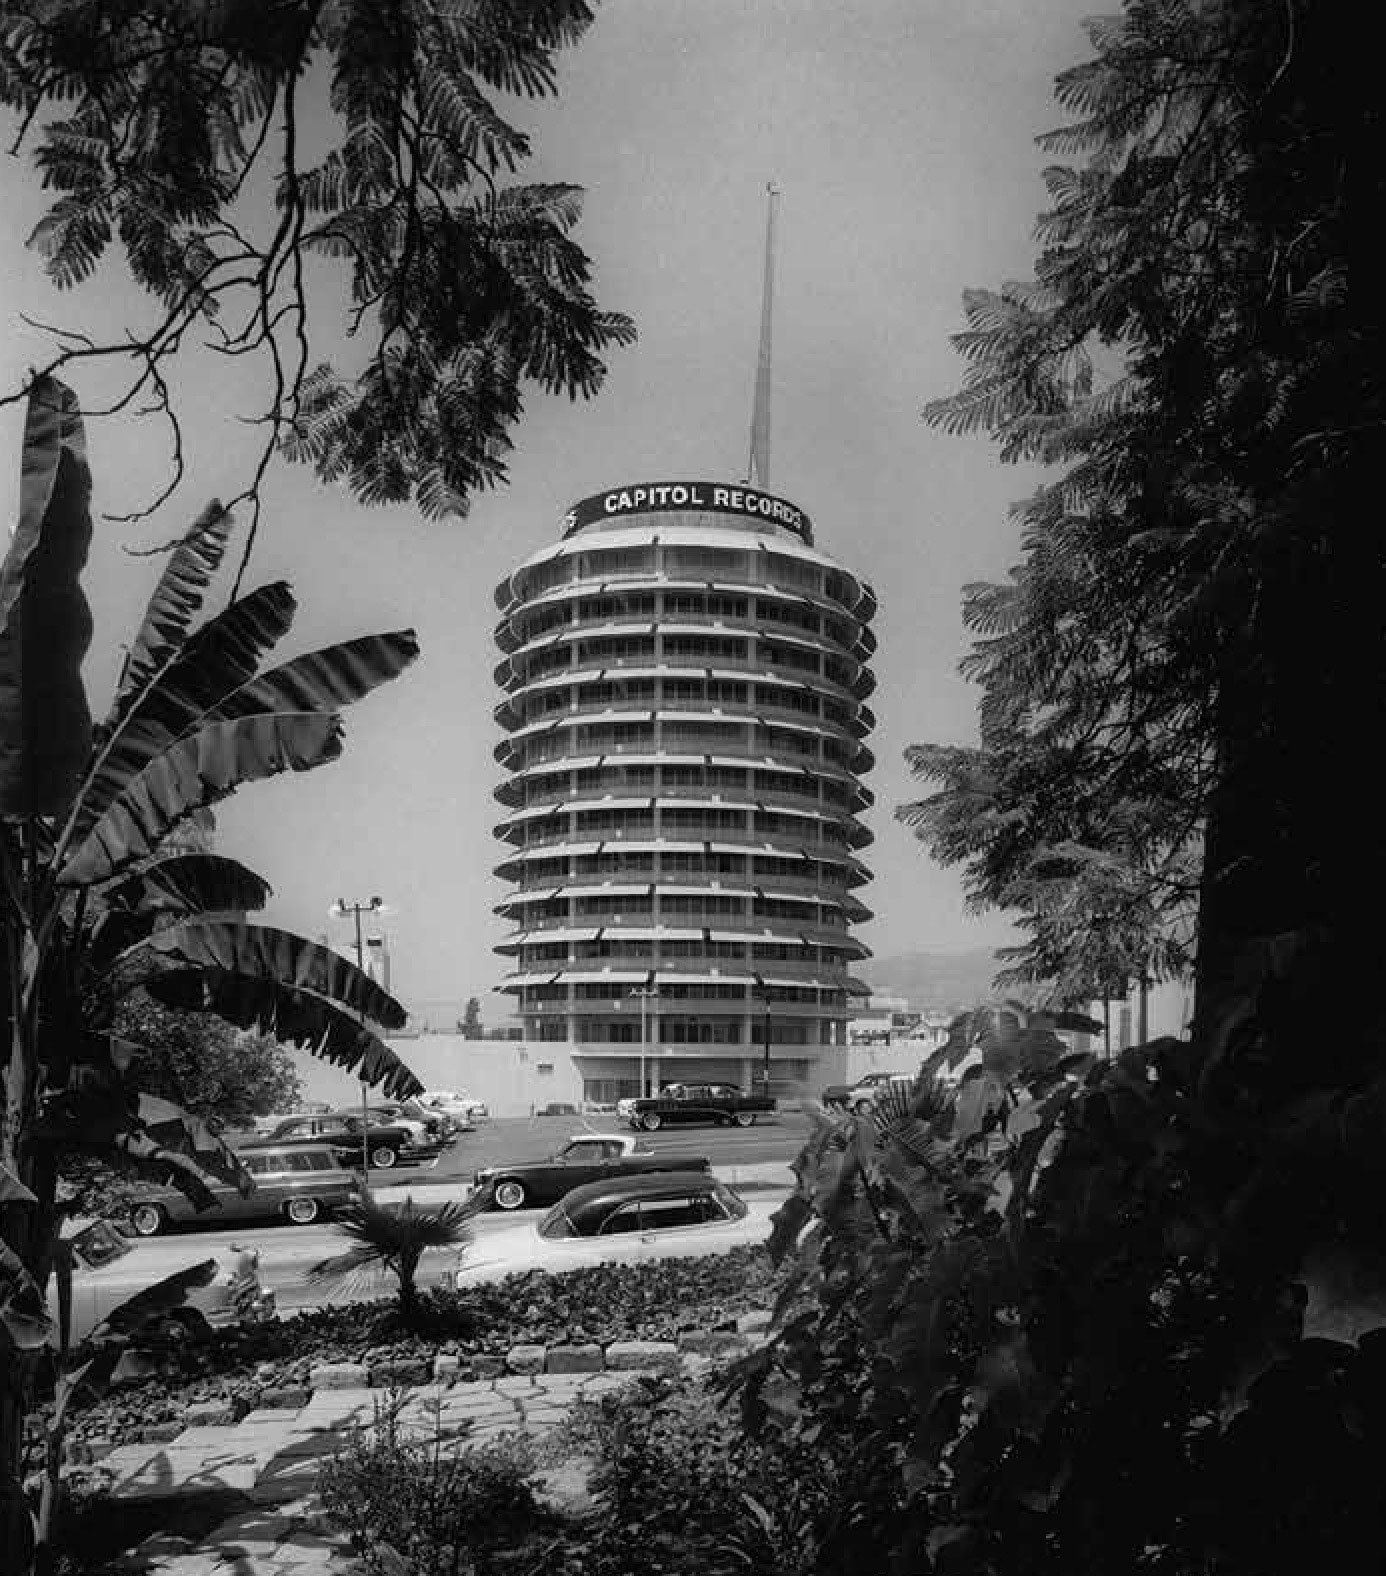 Welton Becket & Associates 1956 Hollywood building housing Capitol Records as photographed by Marvin Rand and featured in California Captured Mid-Century Modern Architecture, Marvin Rand